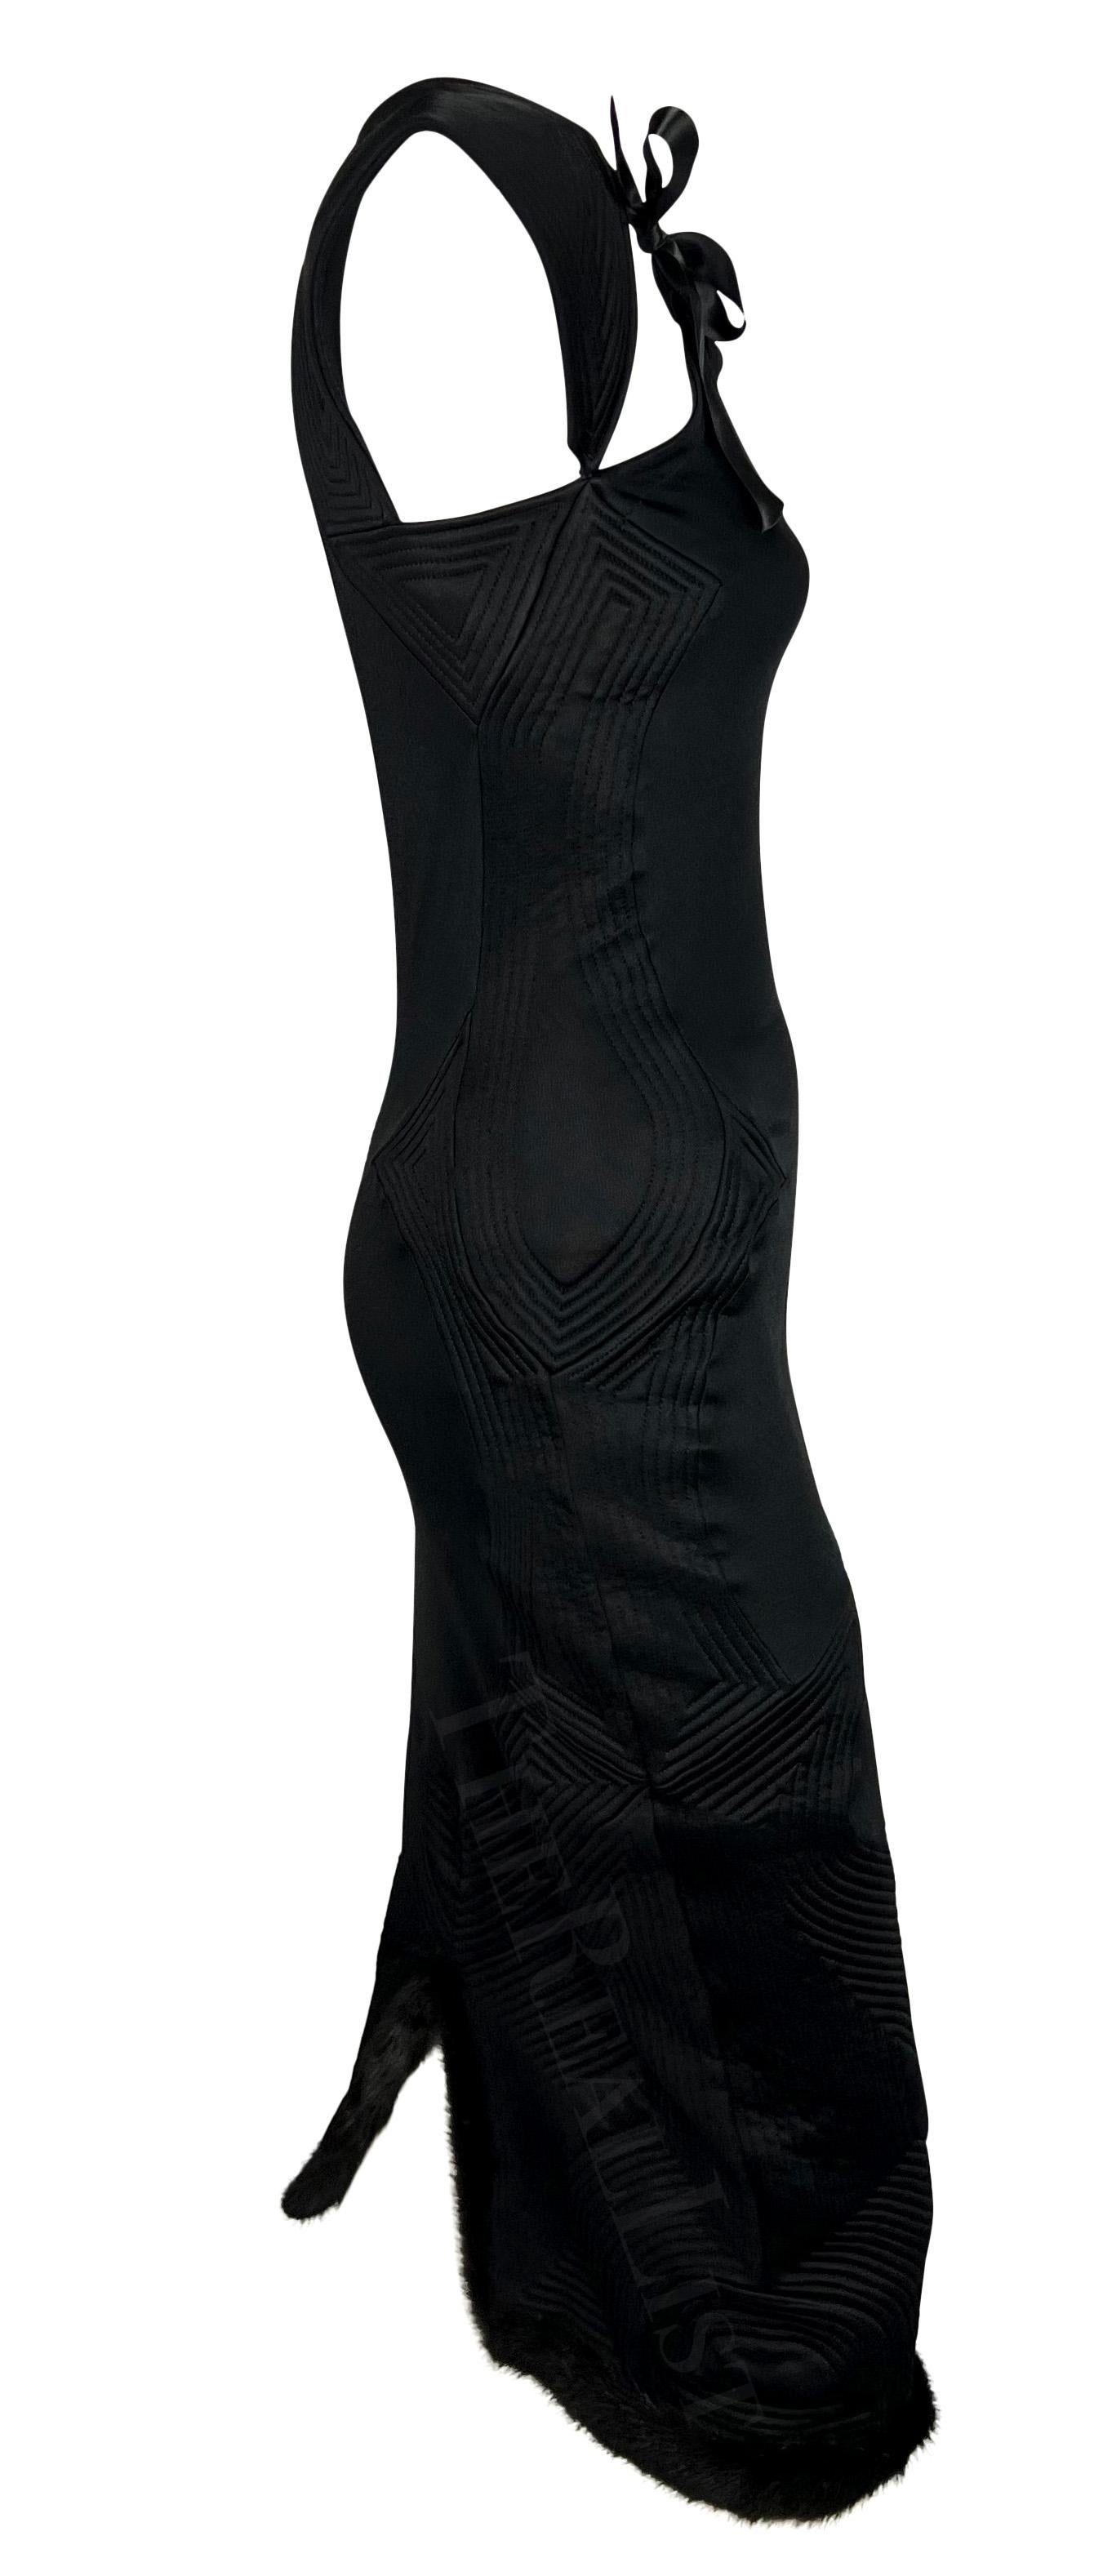 F/W 2004 Yves Saint Laurent by Tom Ford Black Mink Accented Midi Dress For Sale 5